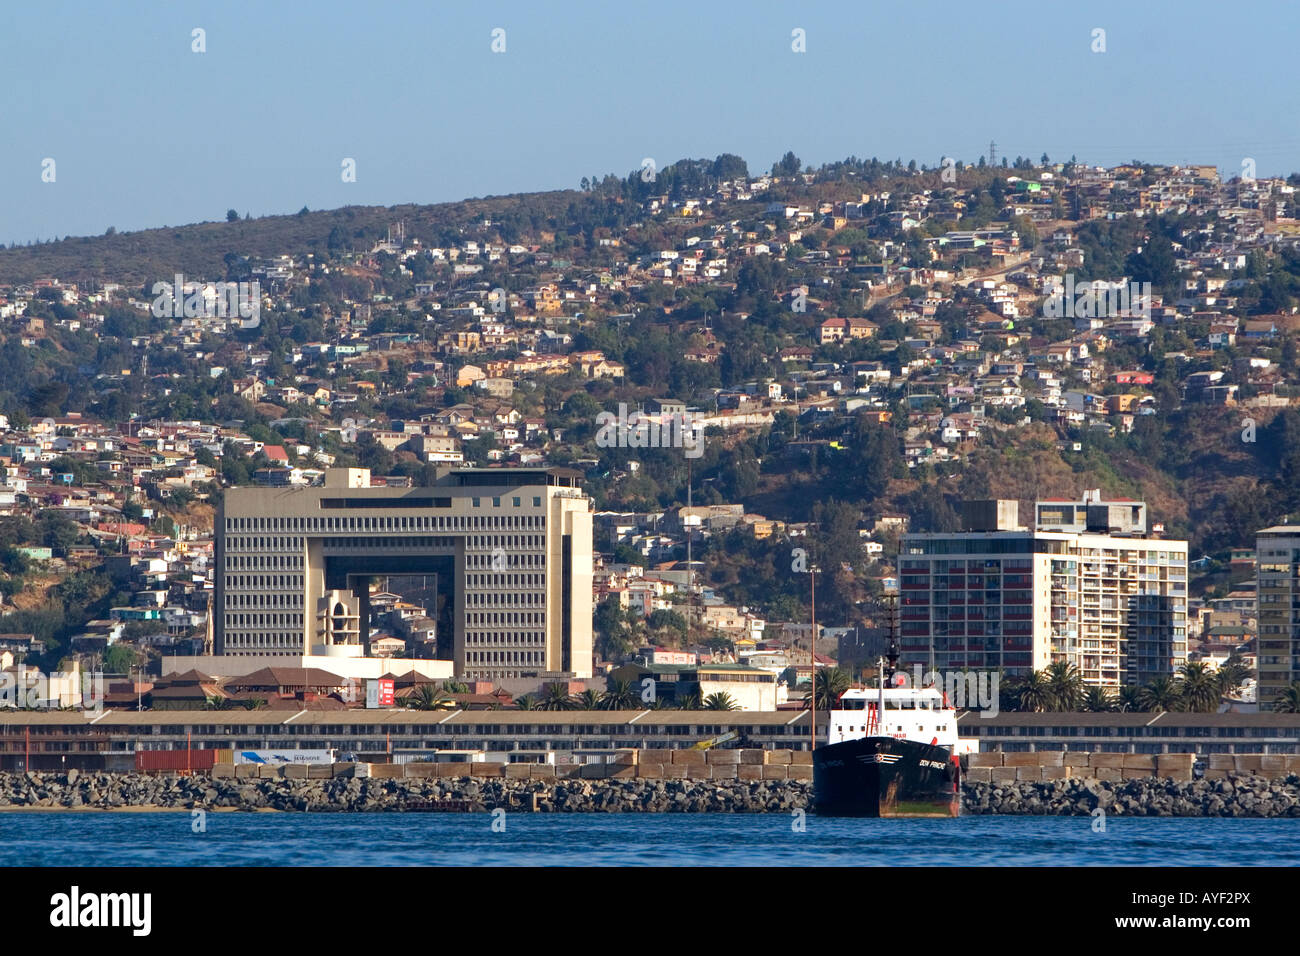 National Congress building and cargo ship in the Port at Valparaiso Chile Stock Photo